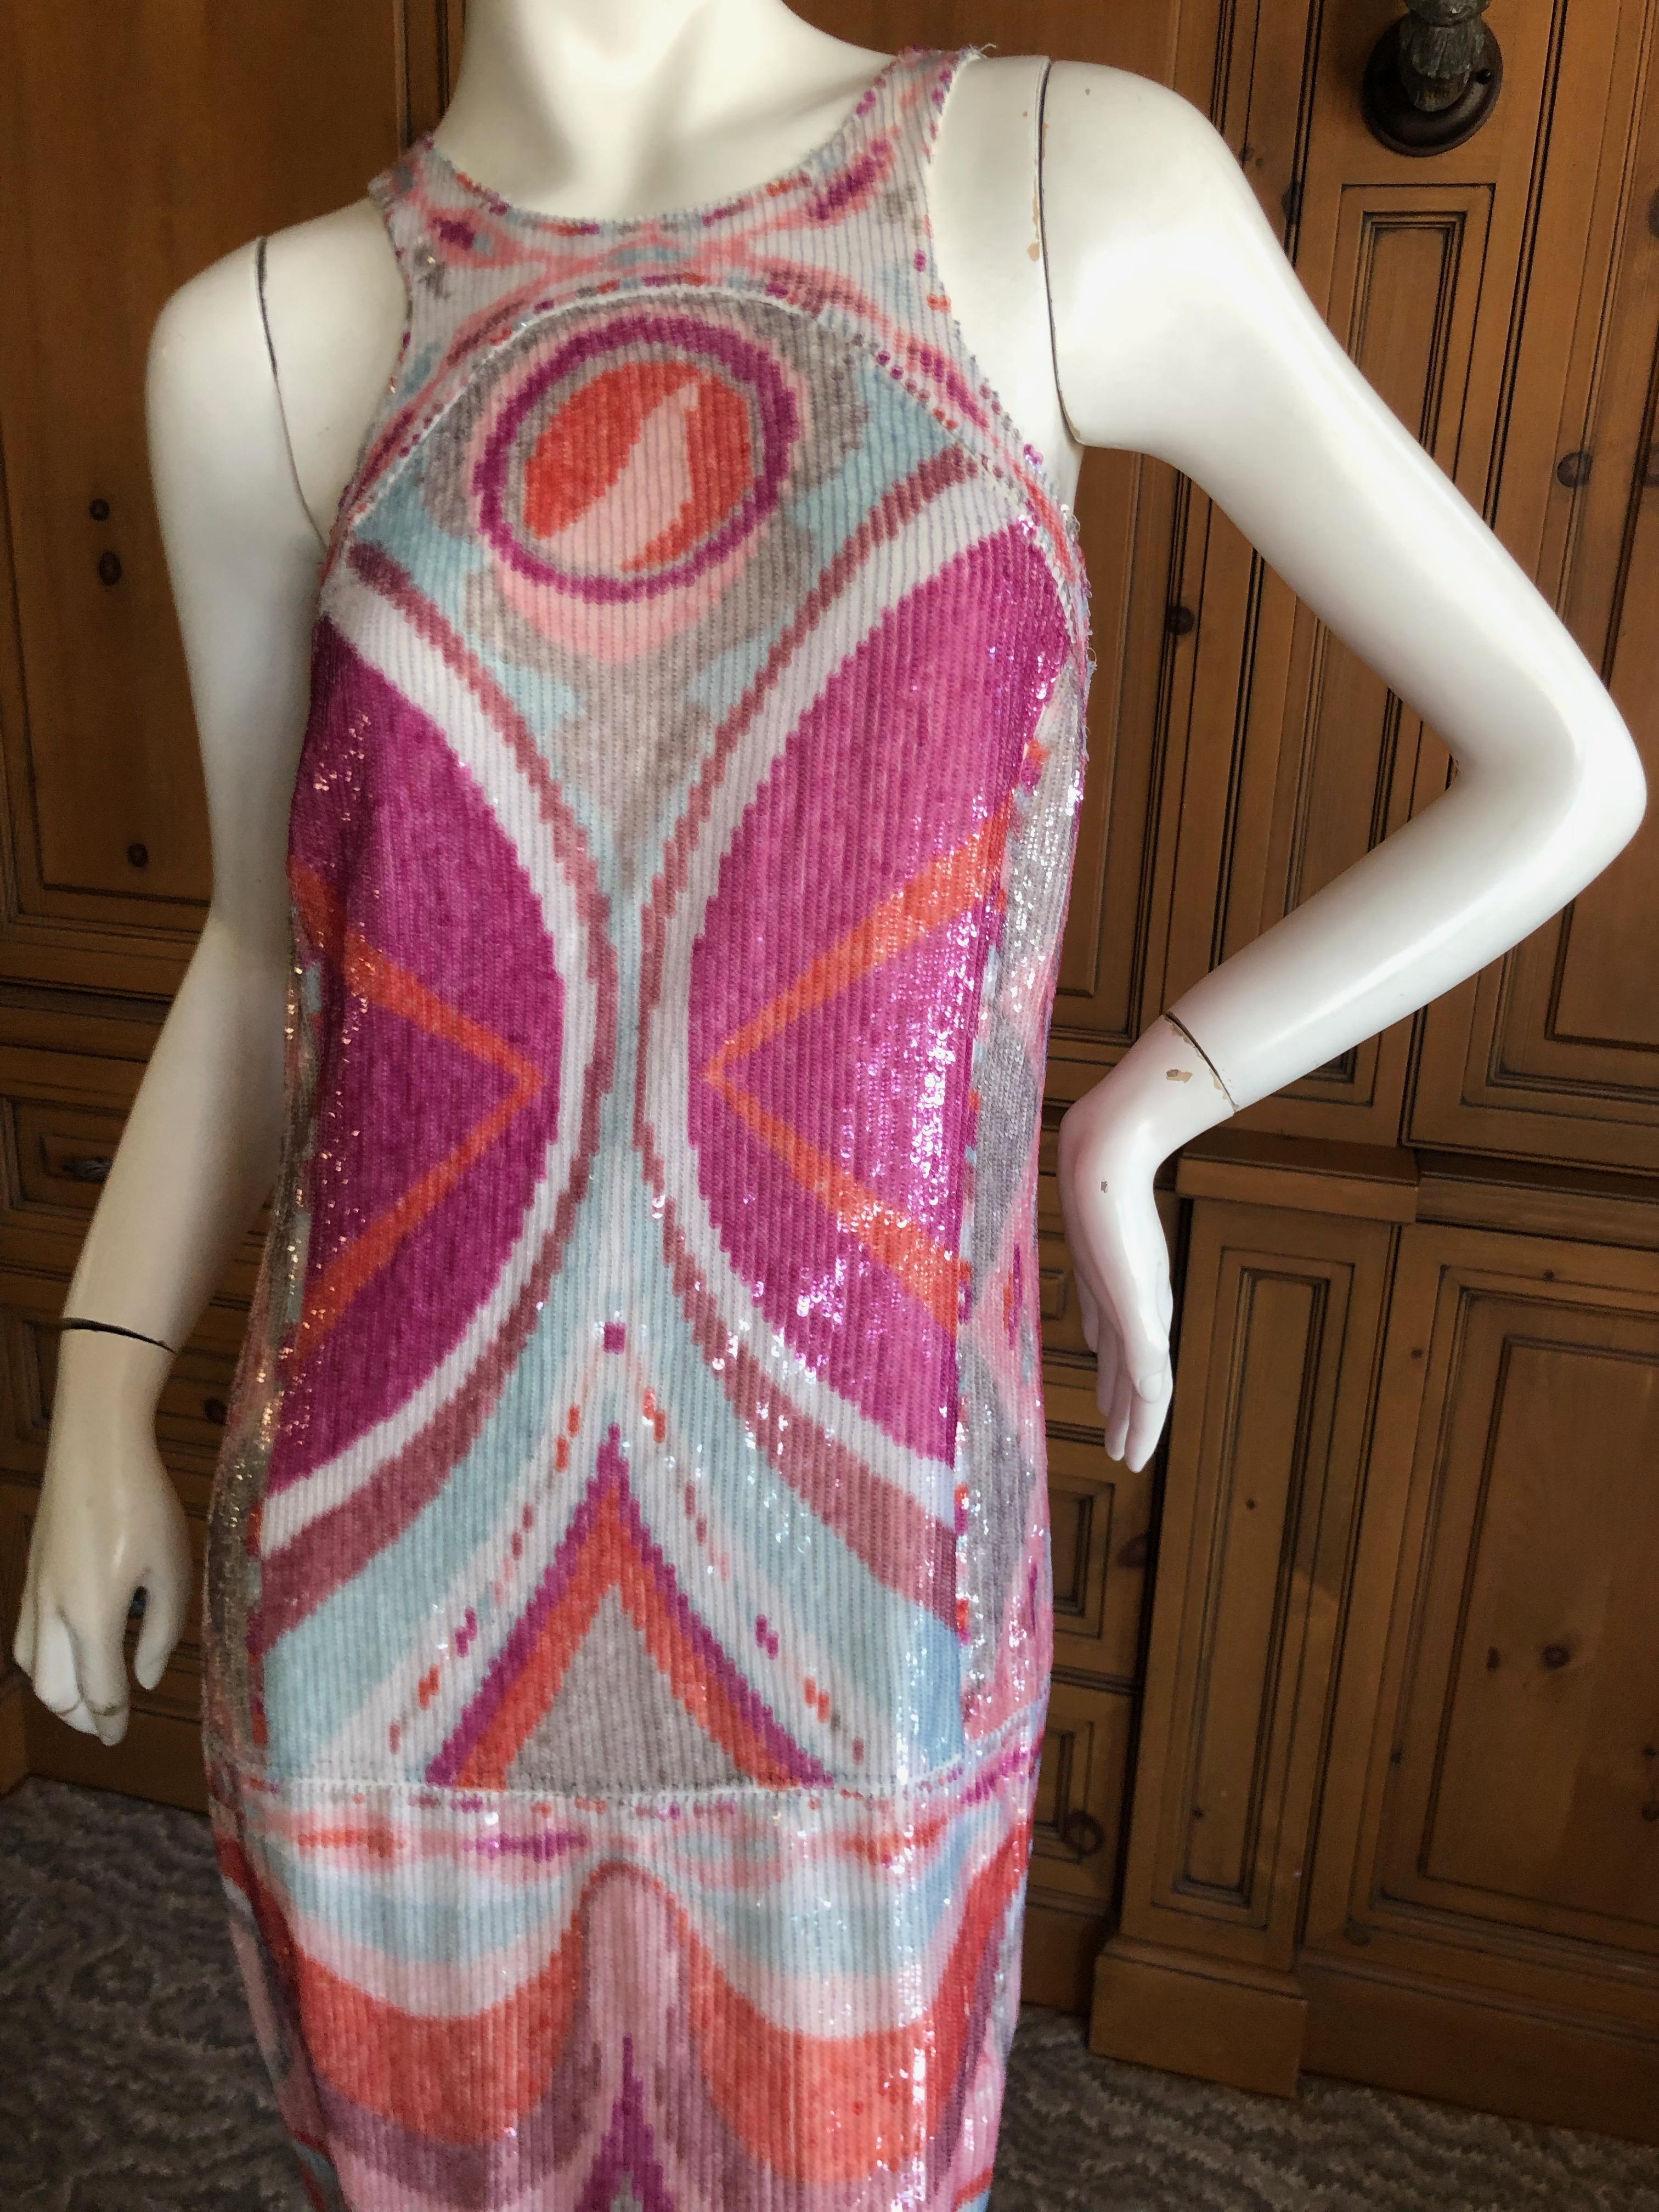 Emilio Pucci Mod 60's Style Sleeveless Silk Dress with Sequin Embellishments 3